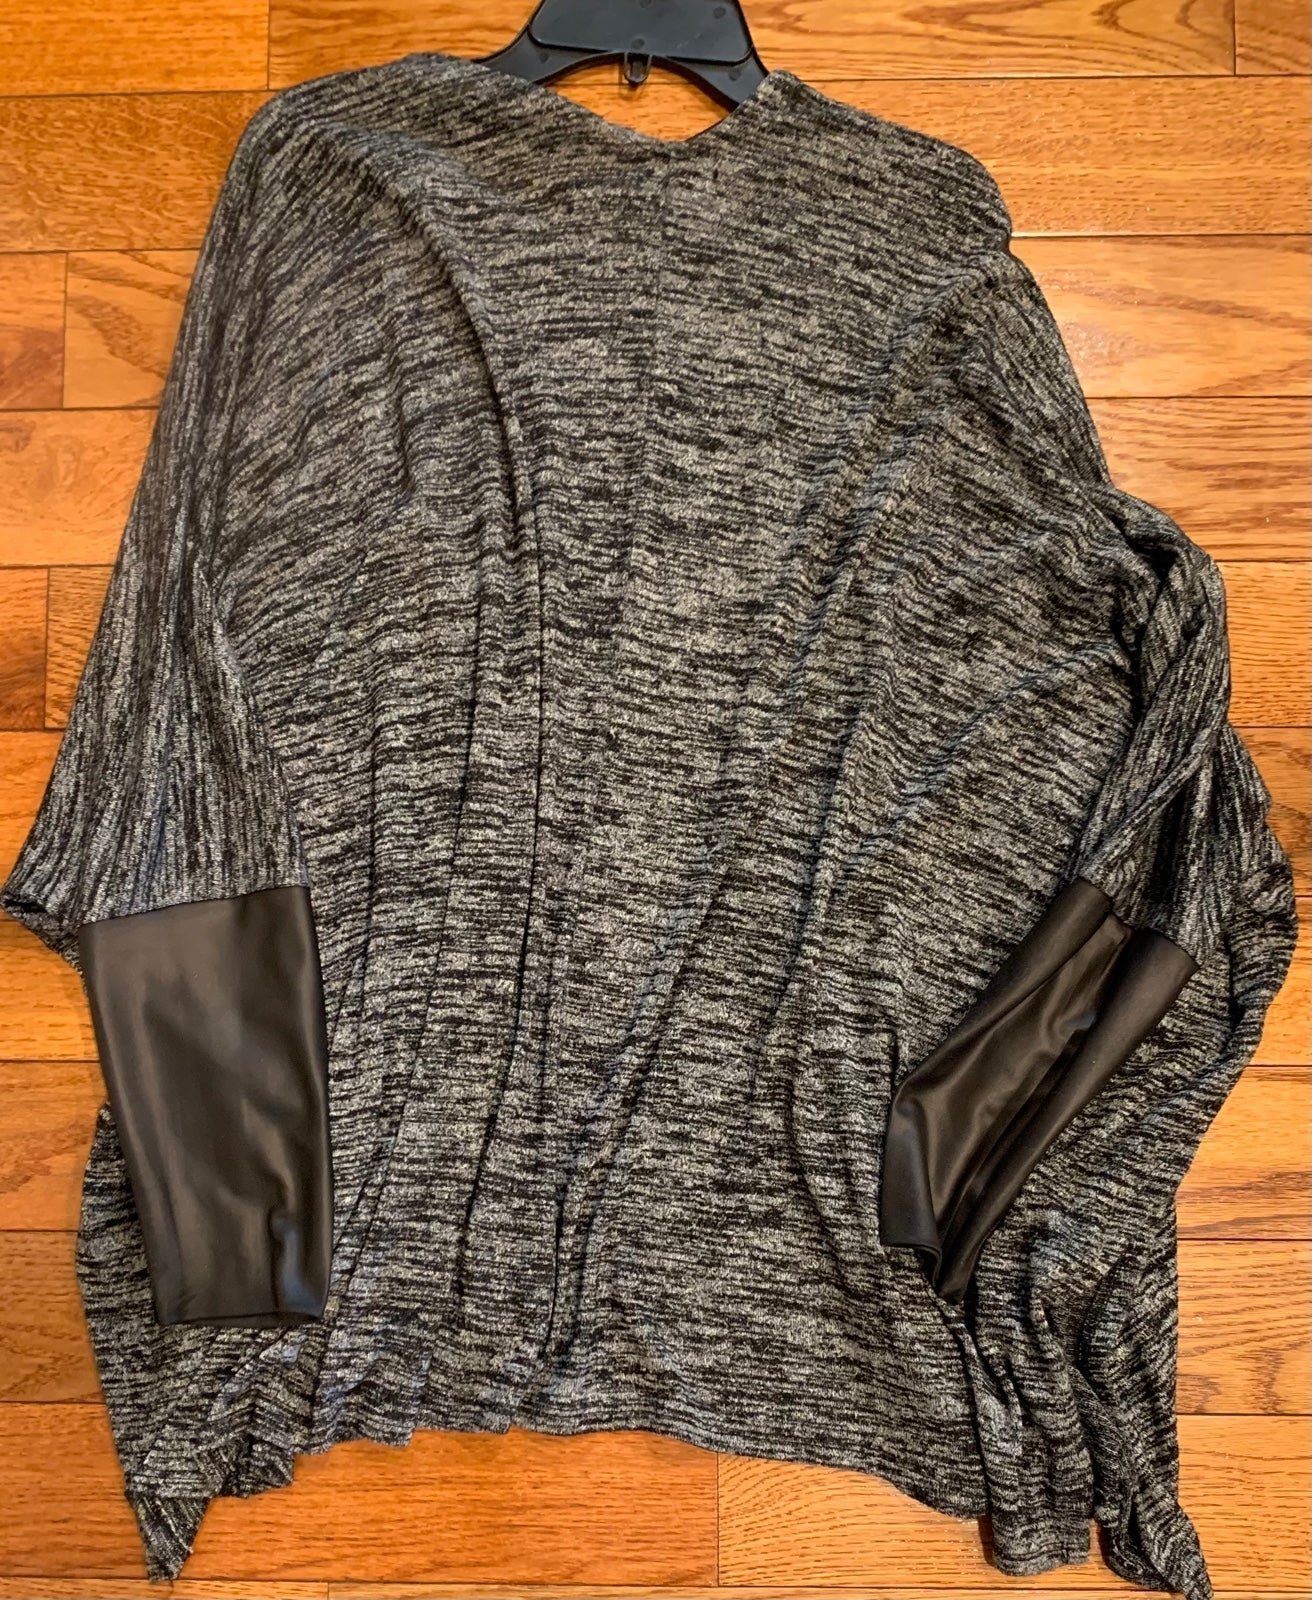 DKNY Jeans Black and Grey Open Waterfall Cardigan Faux 